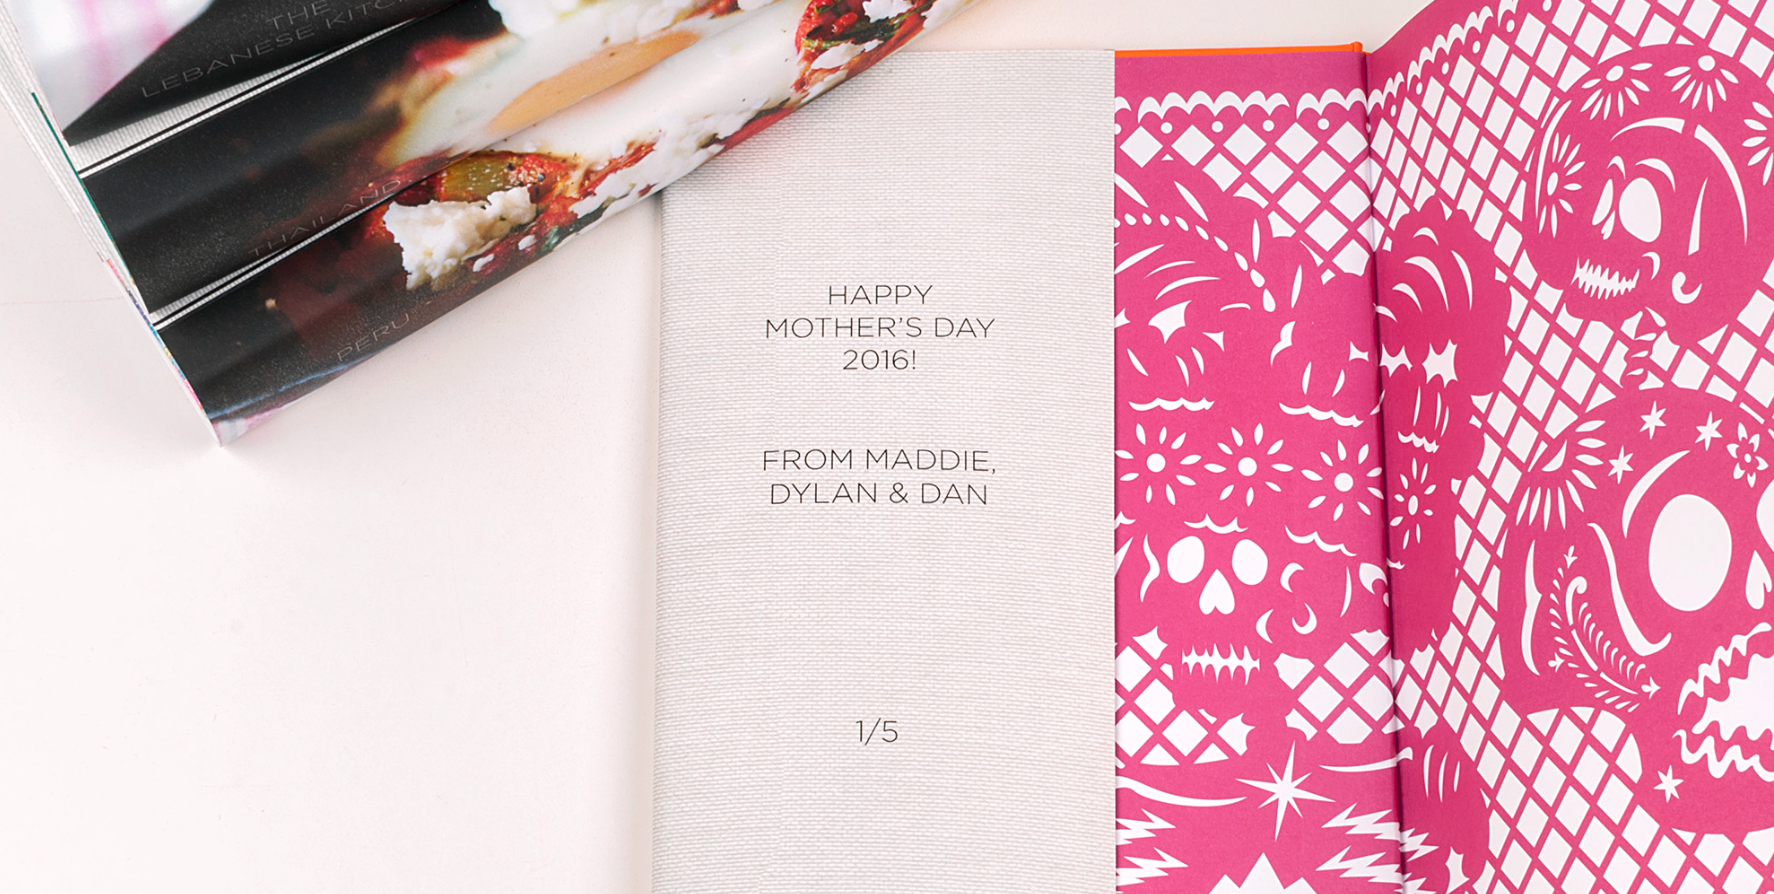 This Is What Your Mom Really Wants For Mother’s Day